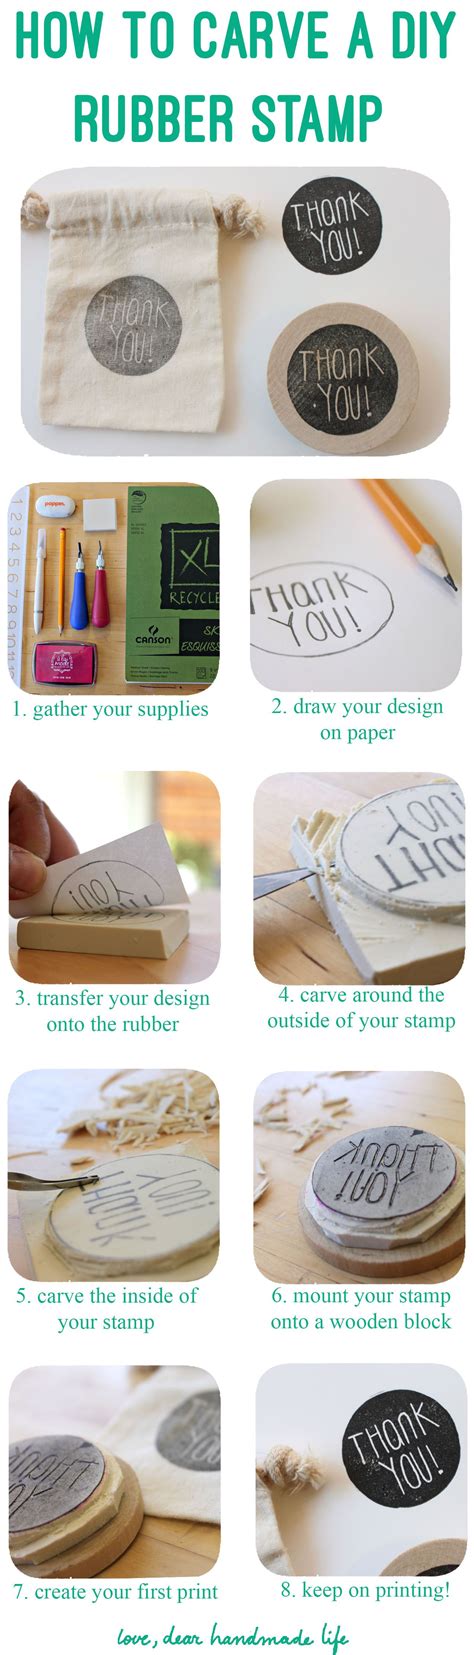 Follow This Tutorial To Carve Your Own Rubber Stamps In Any Design You